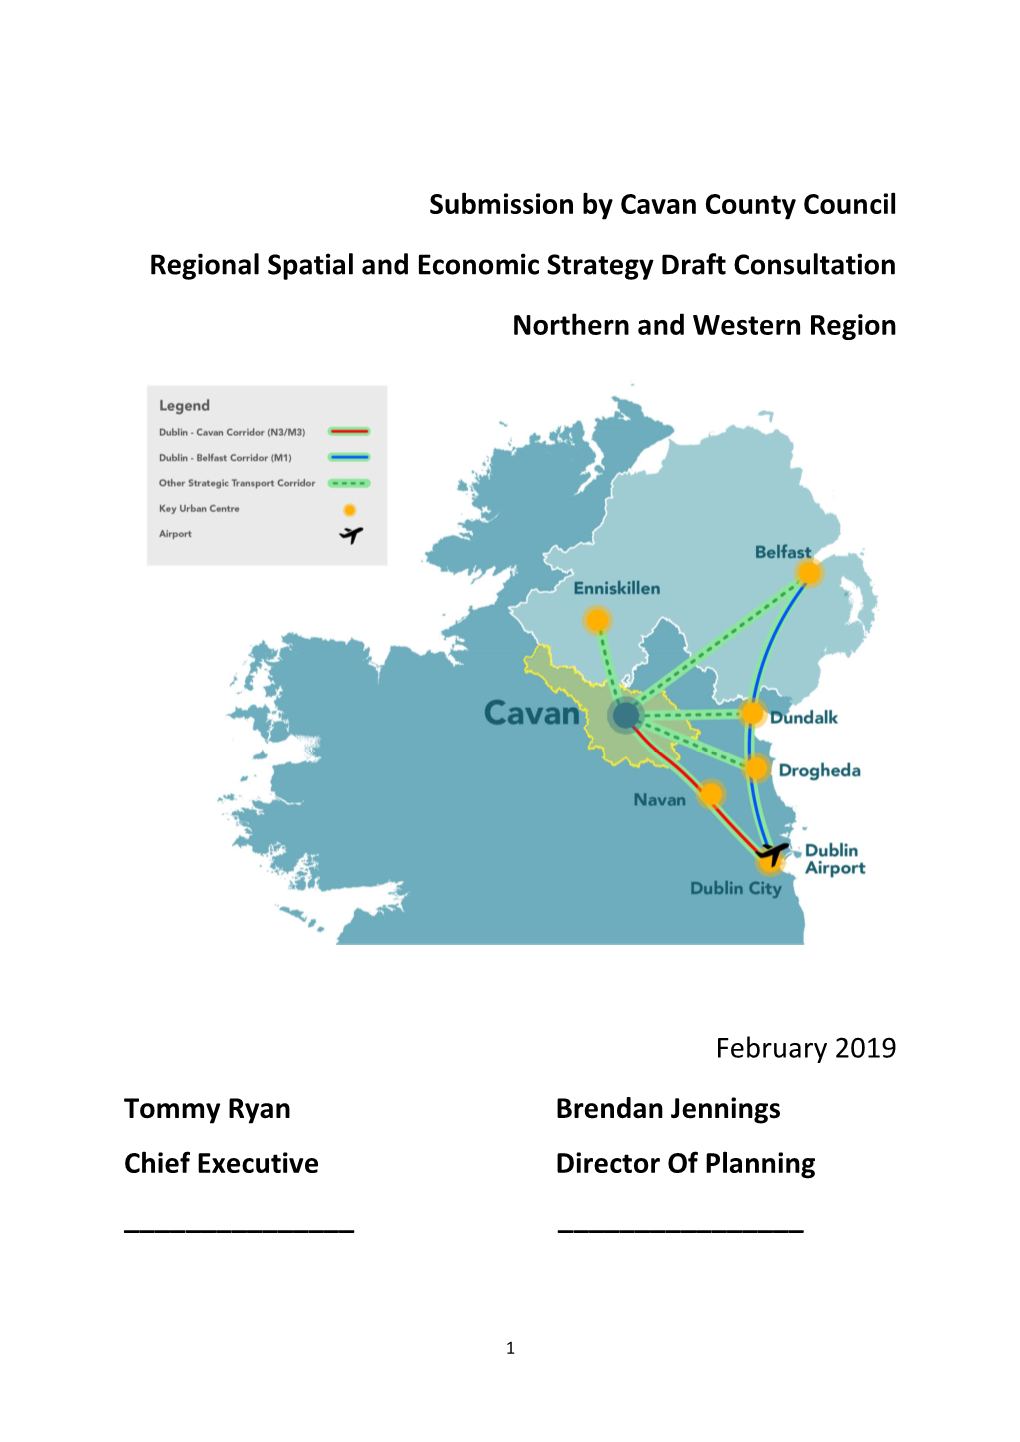 Submission by Cavan County Council Regional Spatial and Economic Strategy Draft Consultation Northern and Western Region